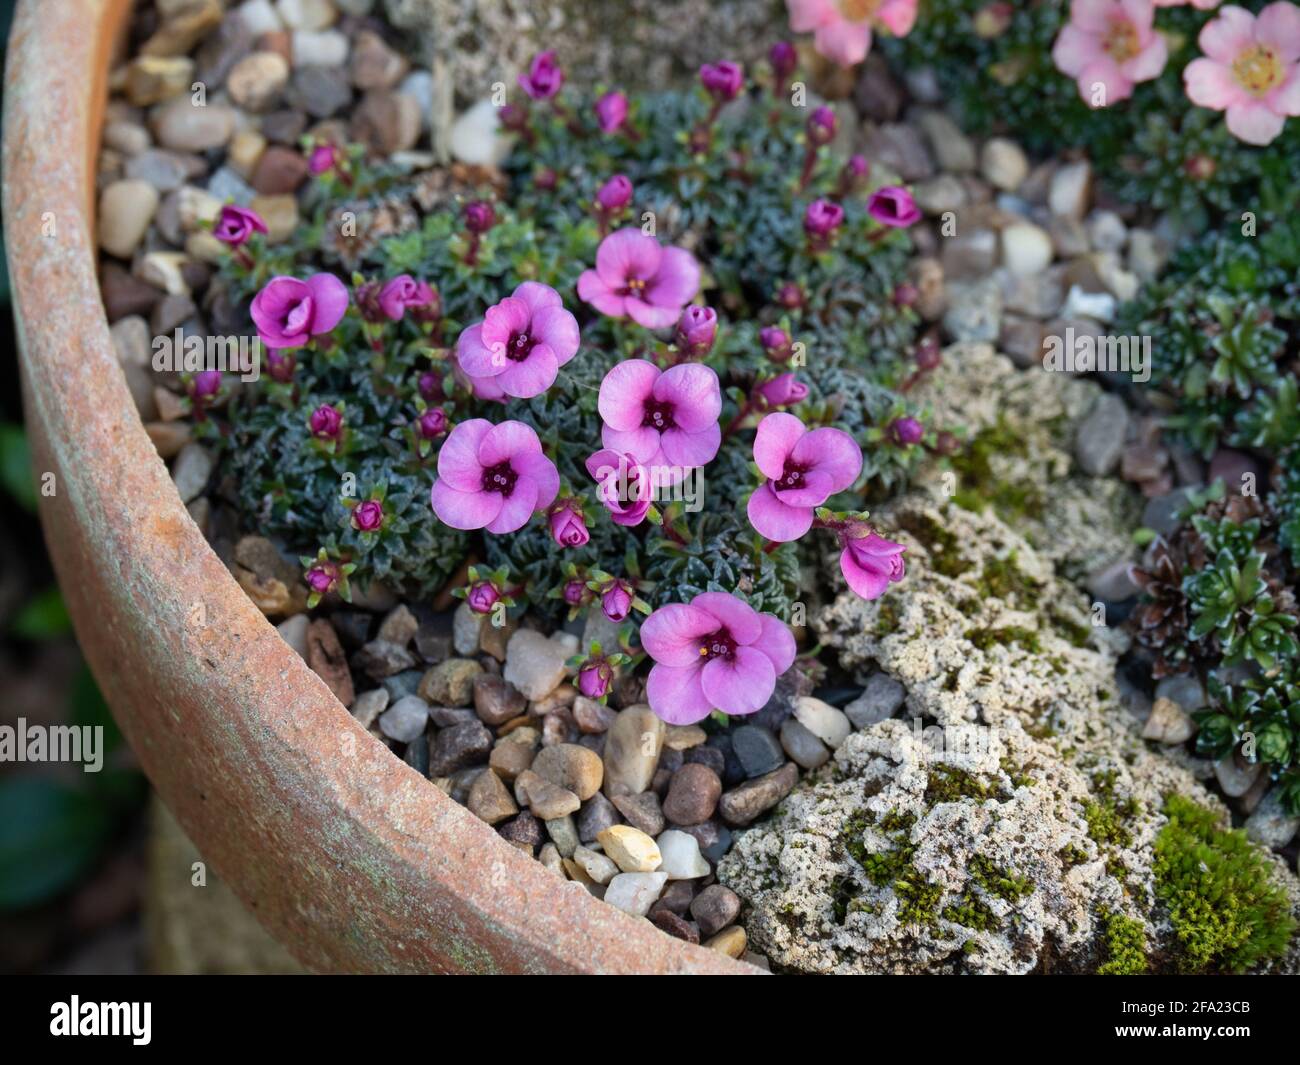 A plant of the kabschia Saxifrage Nancye growing in a terracotta pan and showing the clear pink flowers Stock Photo